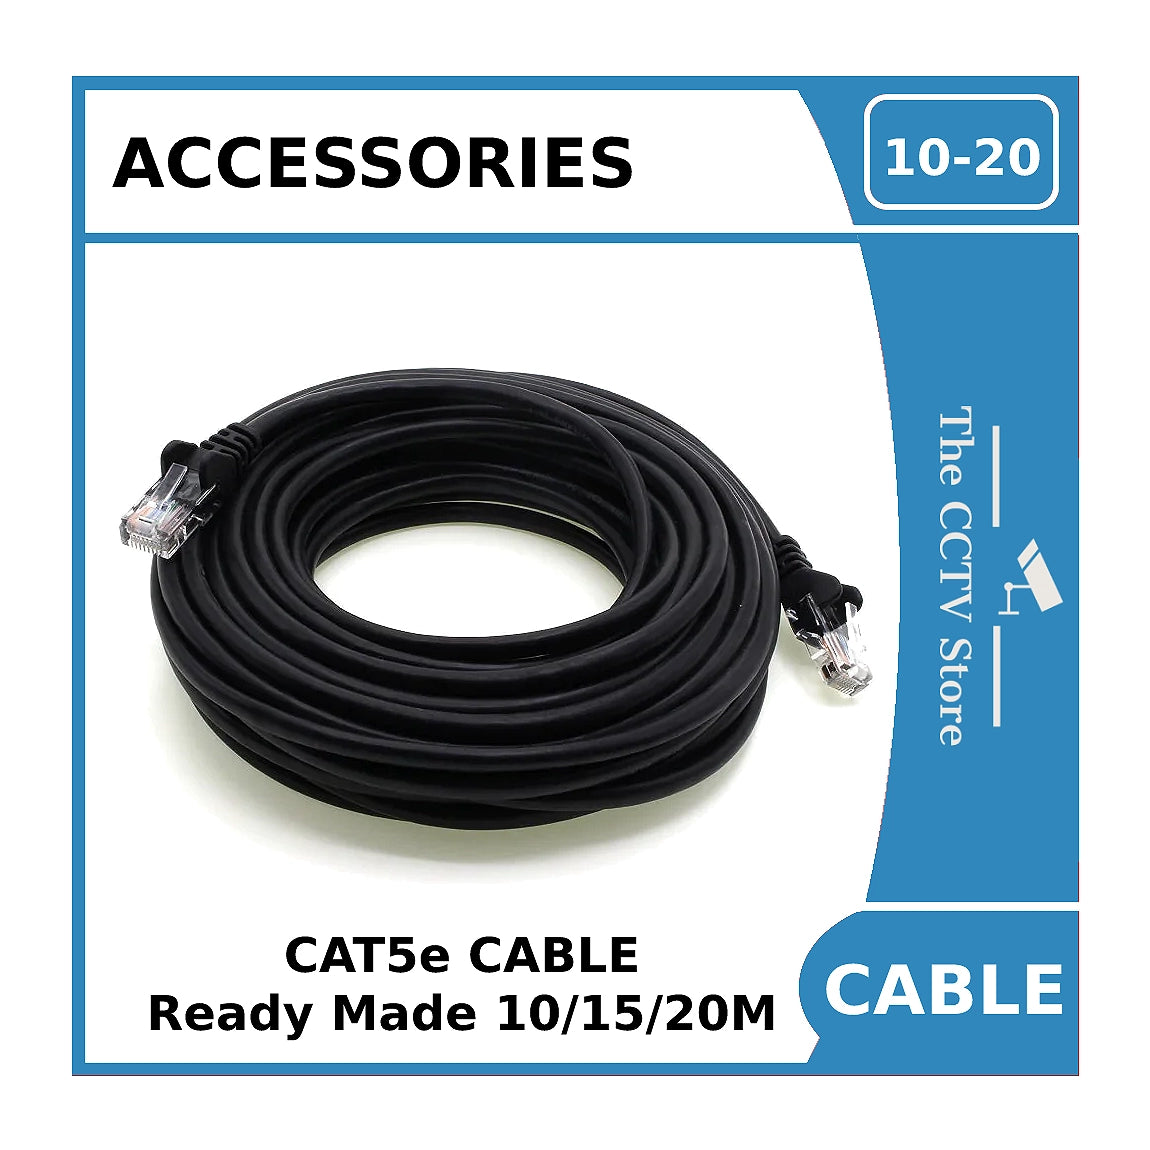 CAT5e Ready Made PVC Network Cable / Patch Lead 10/15/20m